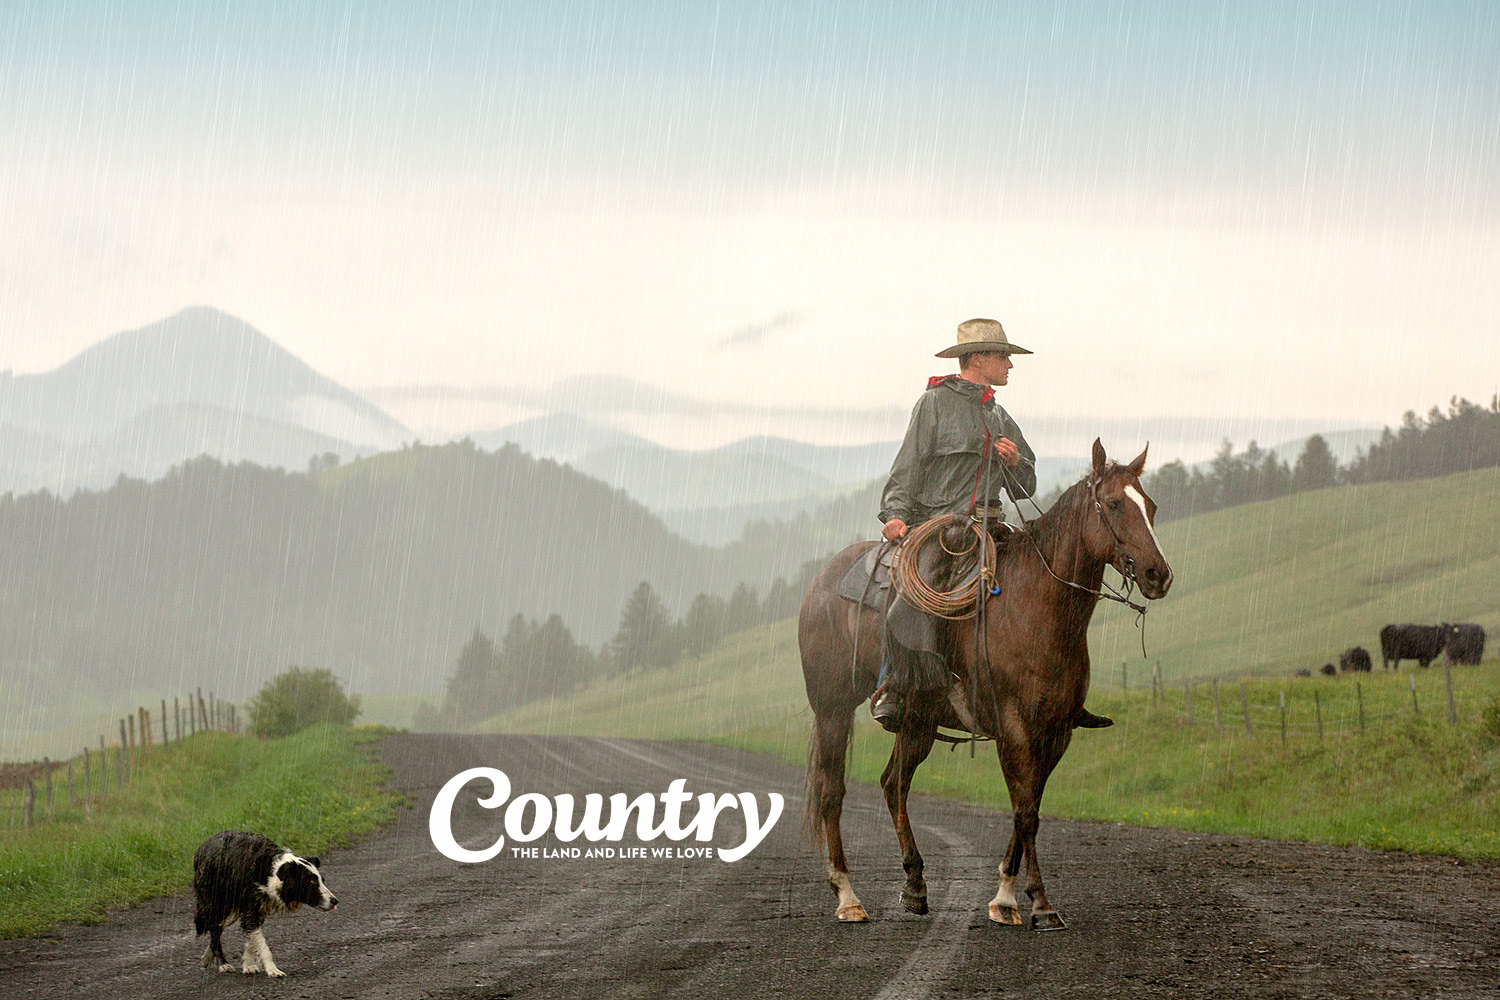 My photo of a cowboy rounding up cattle in the rain was the grand prize winner in Country magazine's 2016 Country Life Photo Contest.&nbsp;→ Buy a Print&nbsp;or License Photo